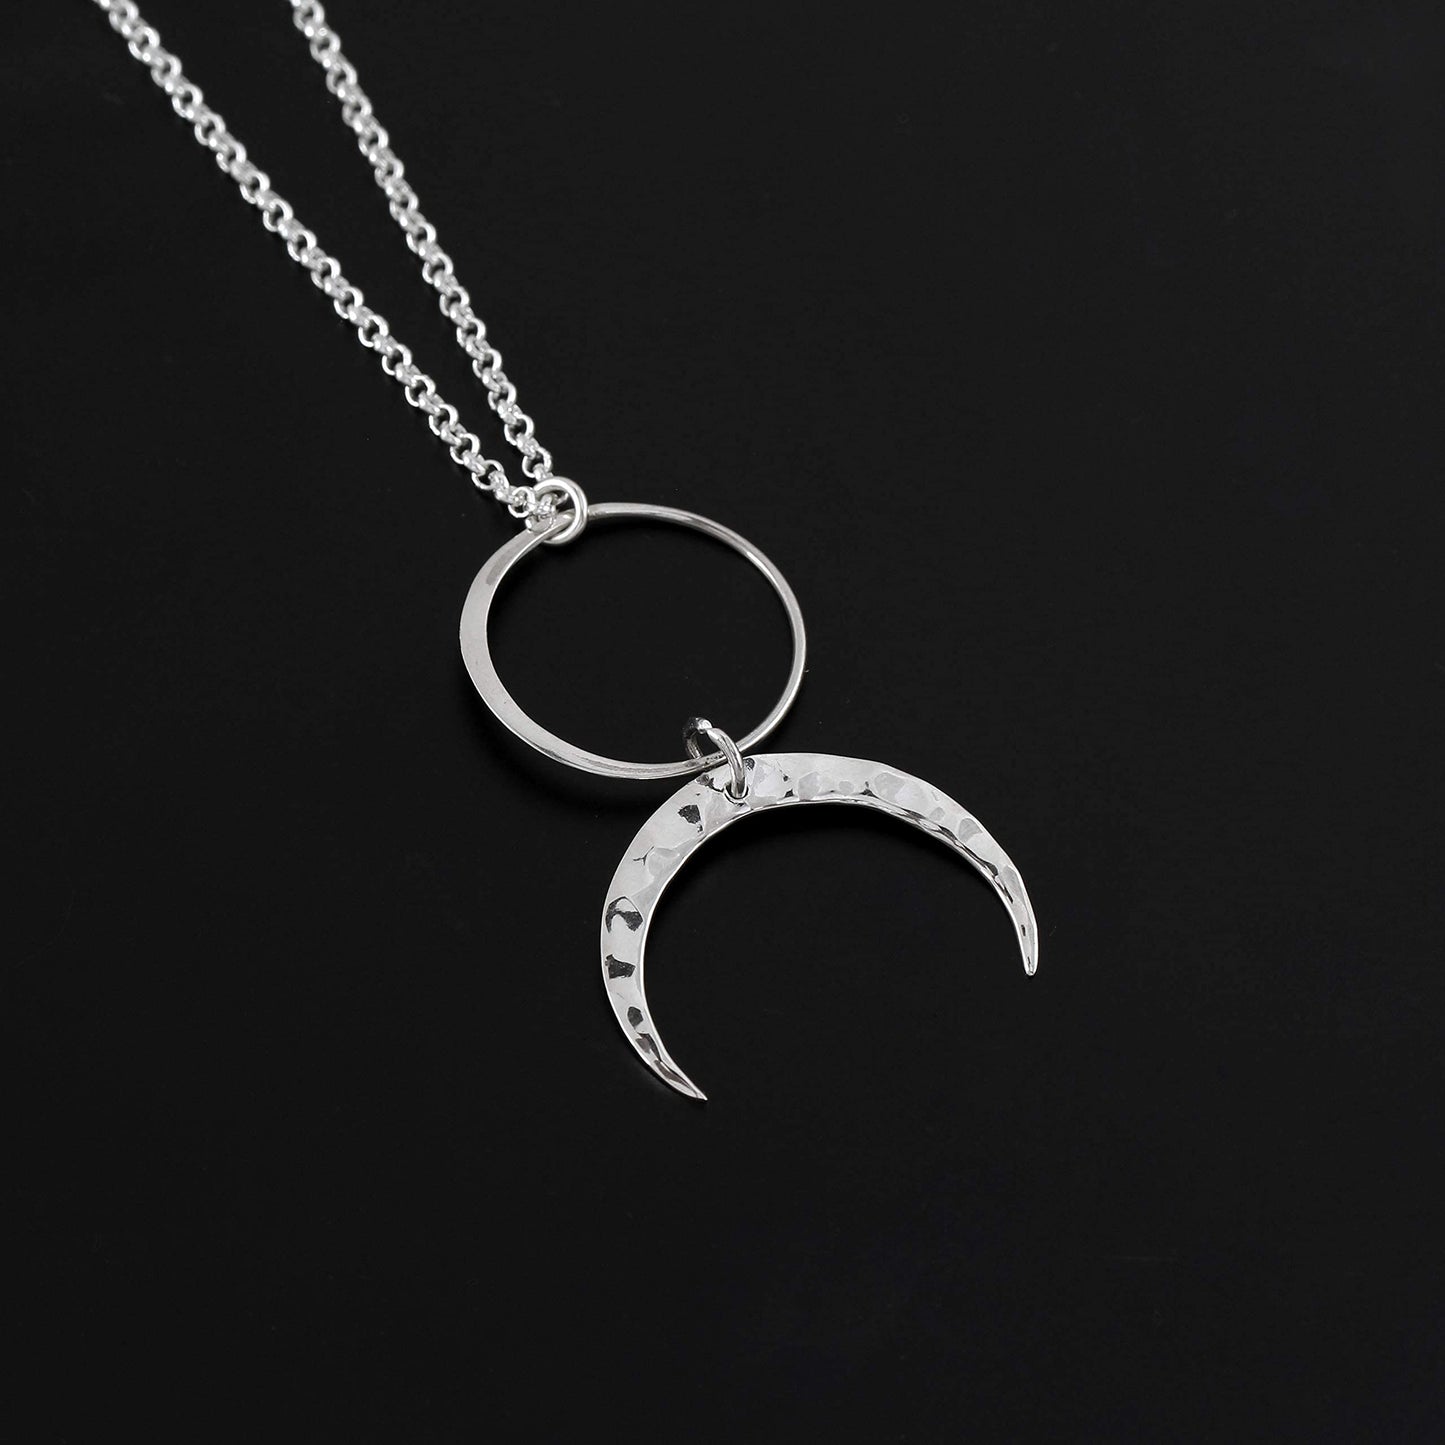 Two Cups Circle and Hammered Crescent Moon Necklace • Modern Minimalist Jewelry • Simple Feminine • Full Moon Half Moon Pendant • Goddess Necklace